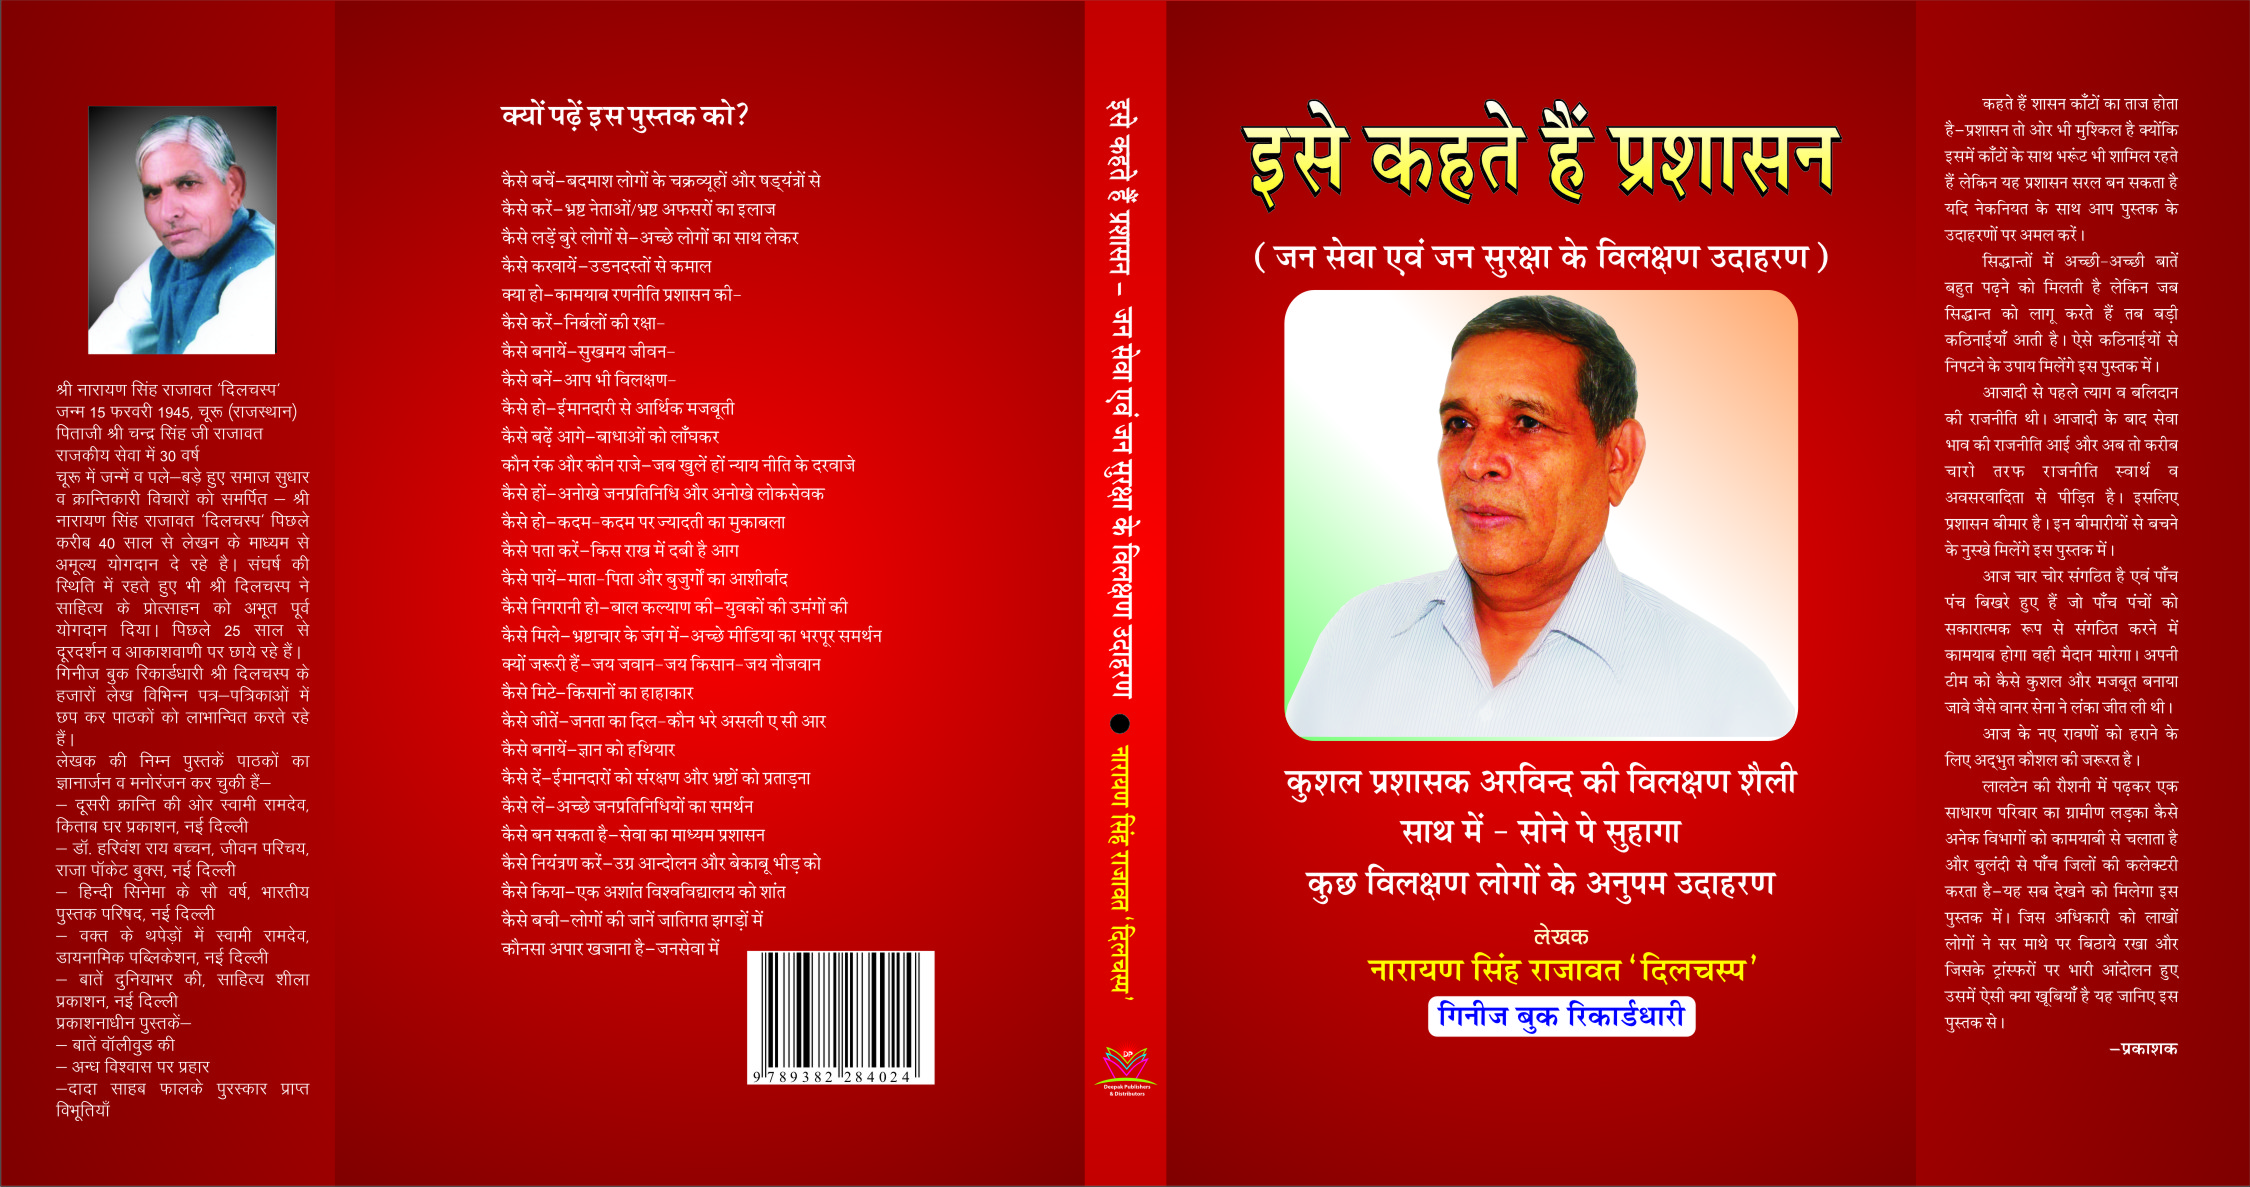 A biography written by Guienness Book of World Record holder Shri narayan Singh Rajawat ‘Dilchasp.’ The book contains excerpts from the administrative and other reforms introduced by Shri RN Arvind. A worth buy for those in service or pursing govt job